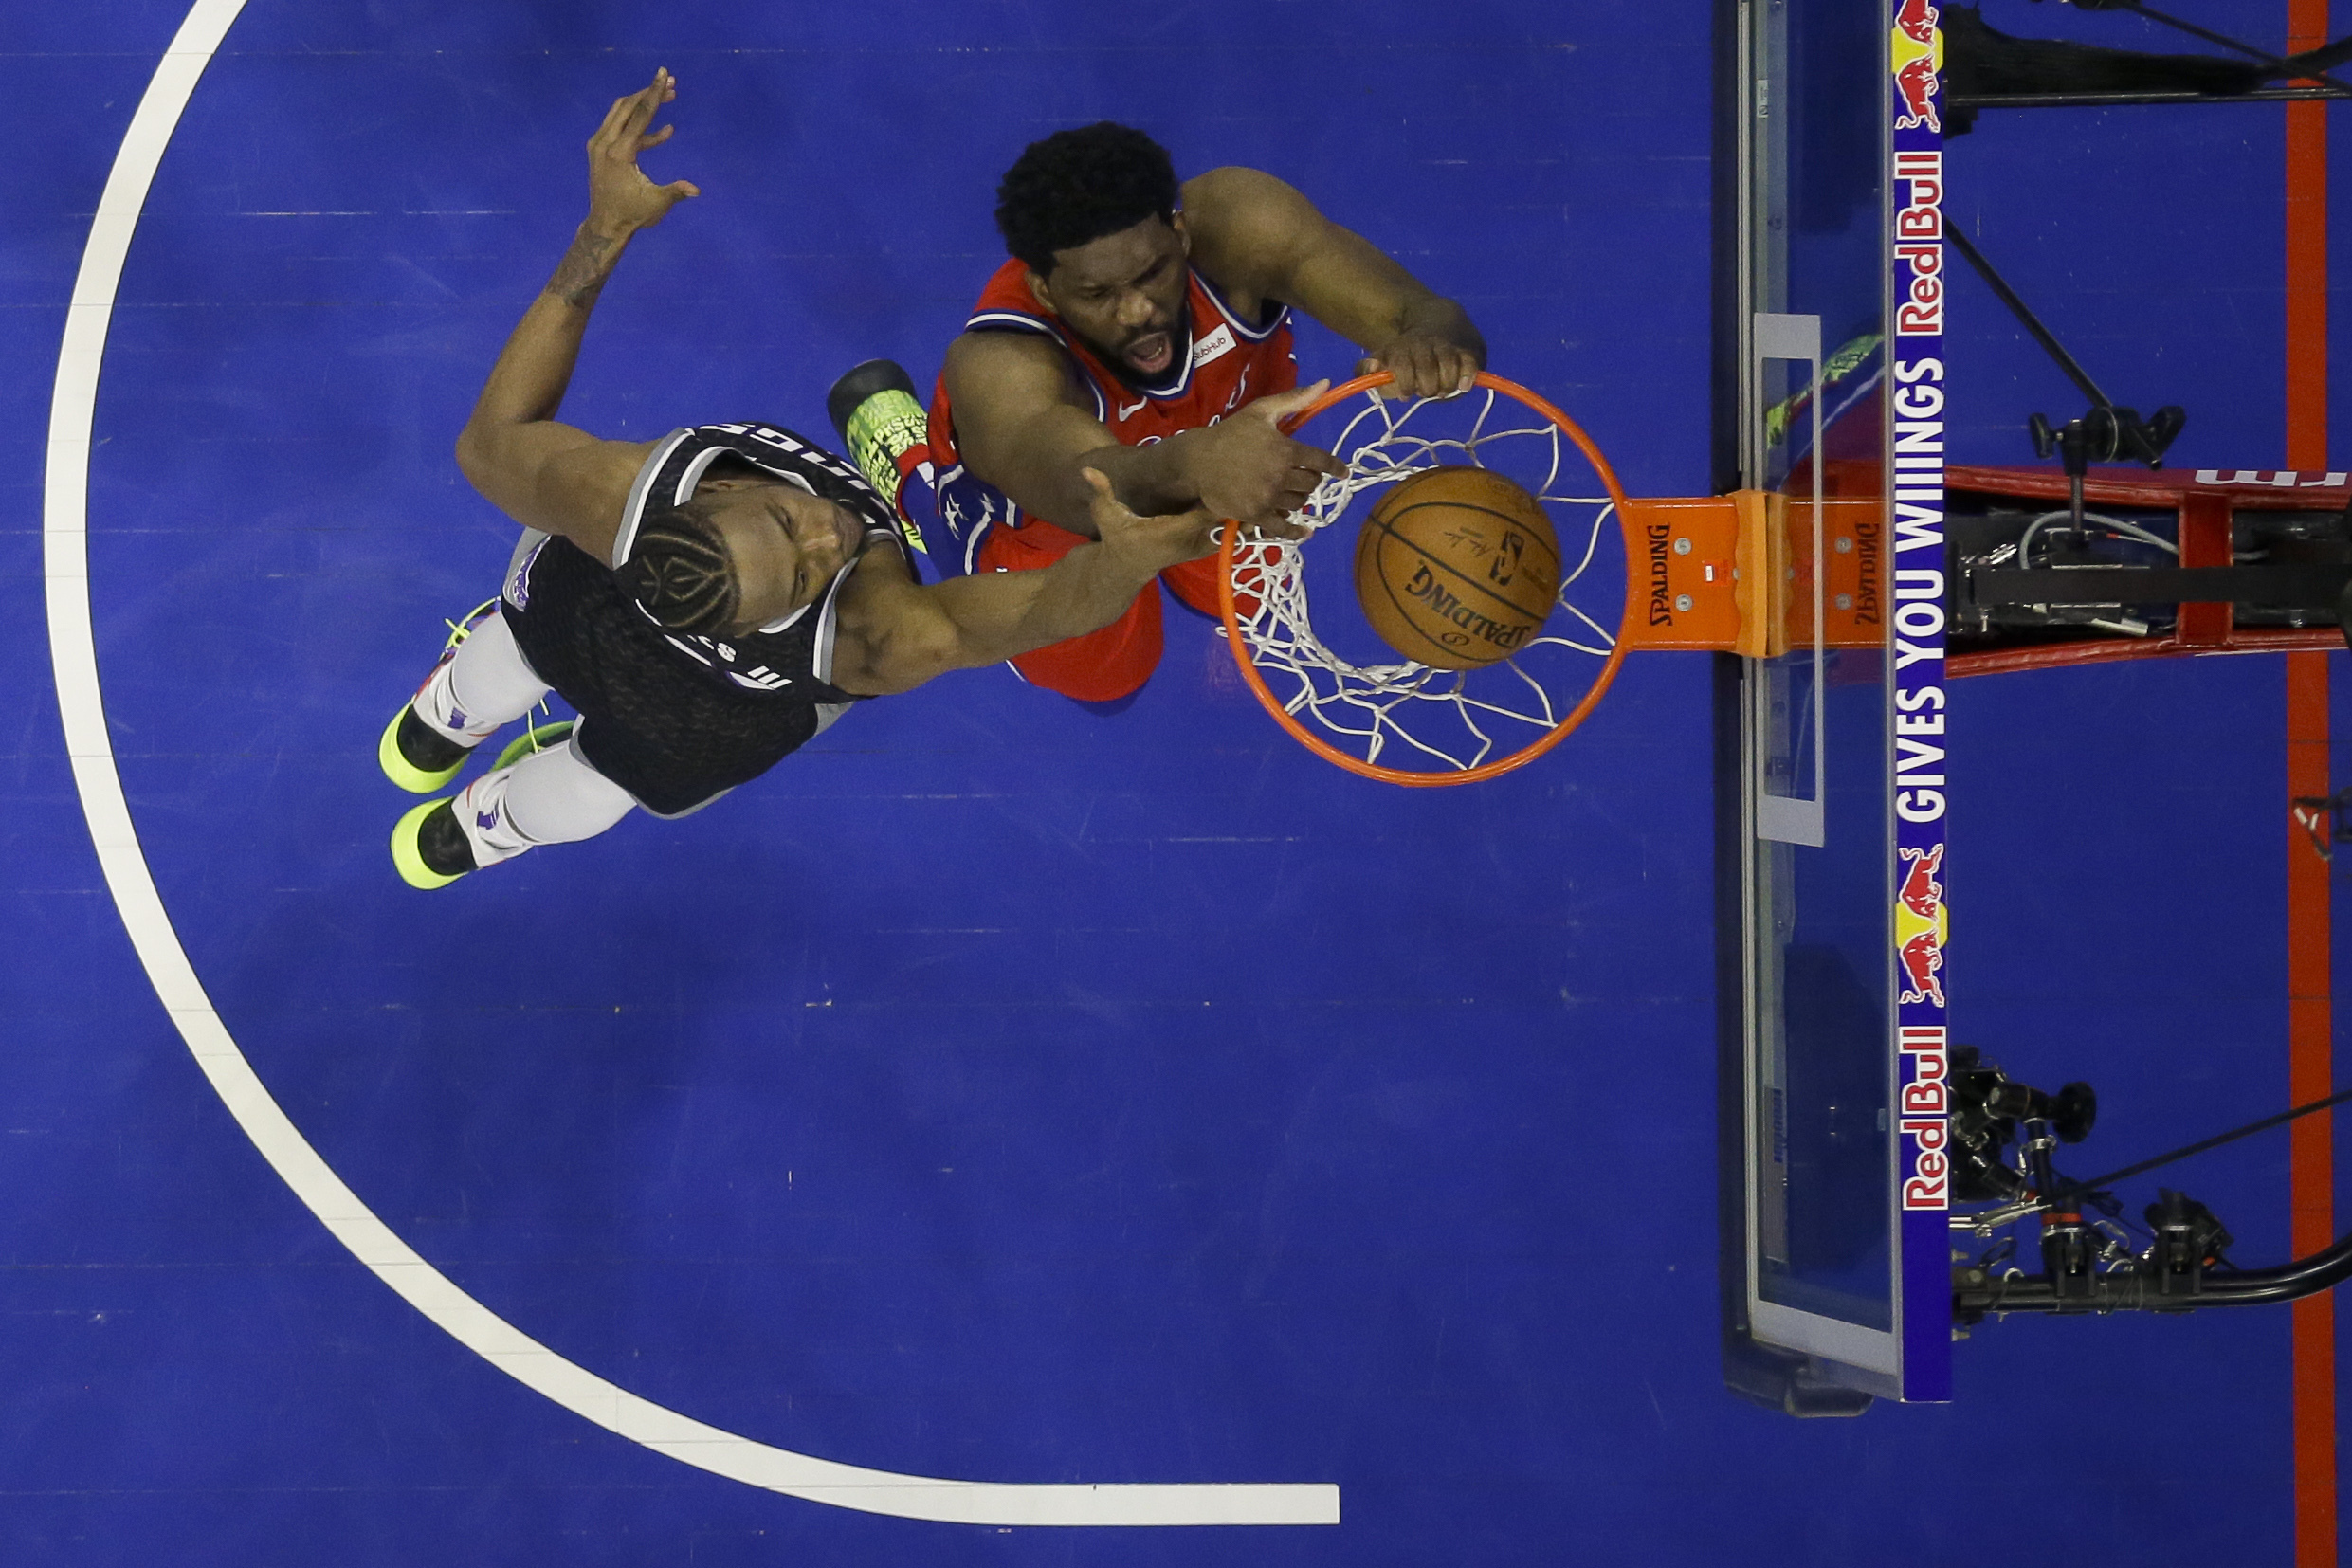 Embiid has 21 points, 17 rebounds, leads 76ers past Kings